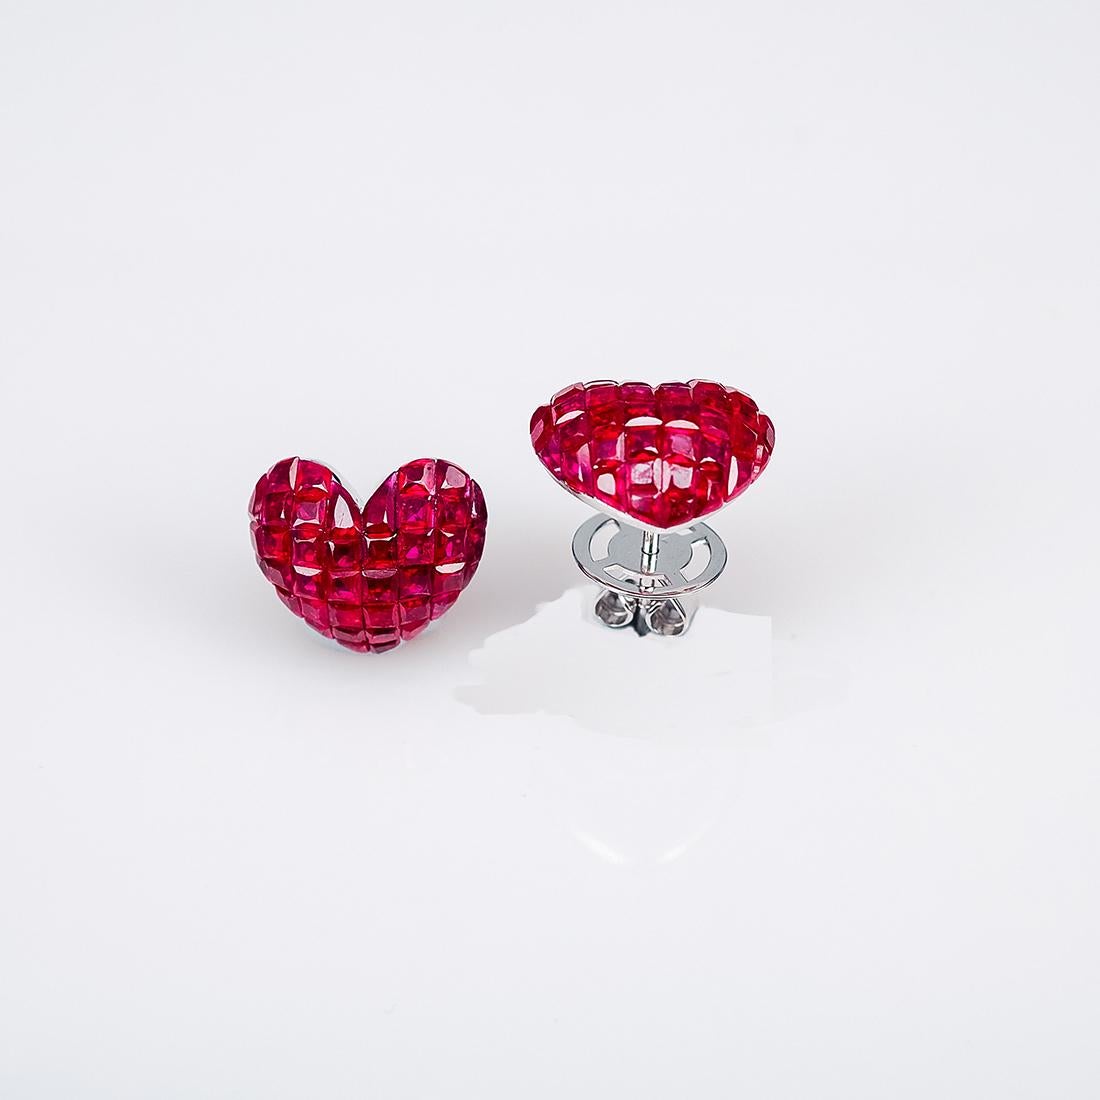 Ruby stud earrings design as classic luxury elegant style.You can use for everyday and also for the evening party.We use the top quality Ruby which make in invisible setting.We set the stone in perfection as we are professional in this kind of